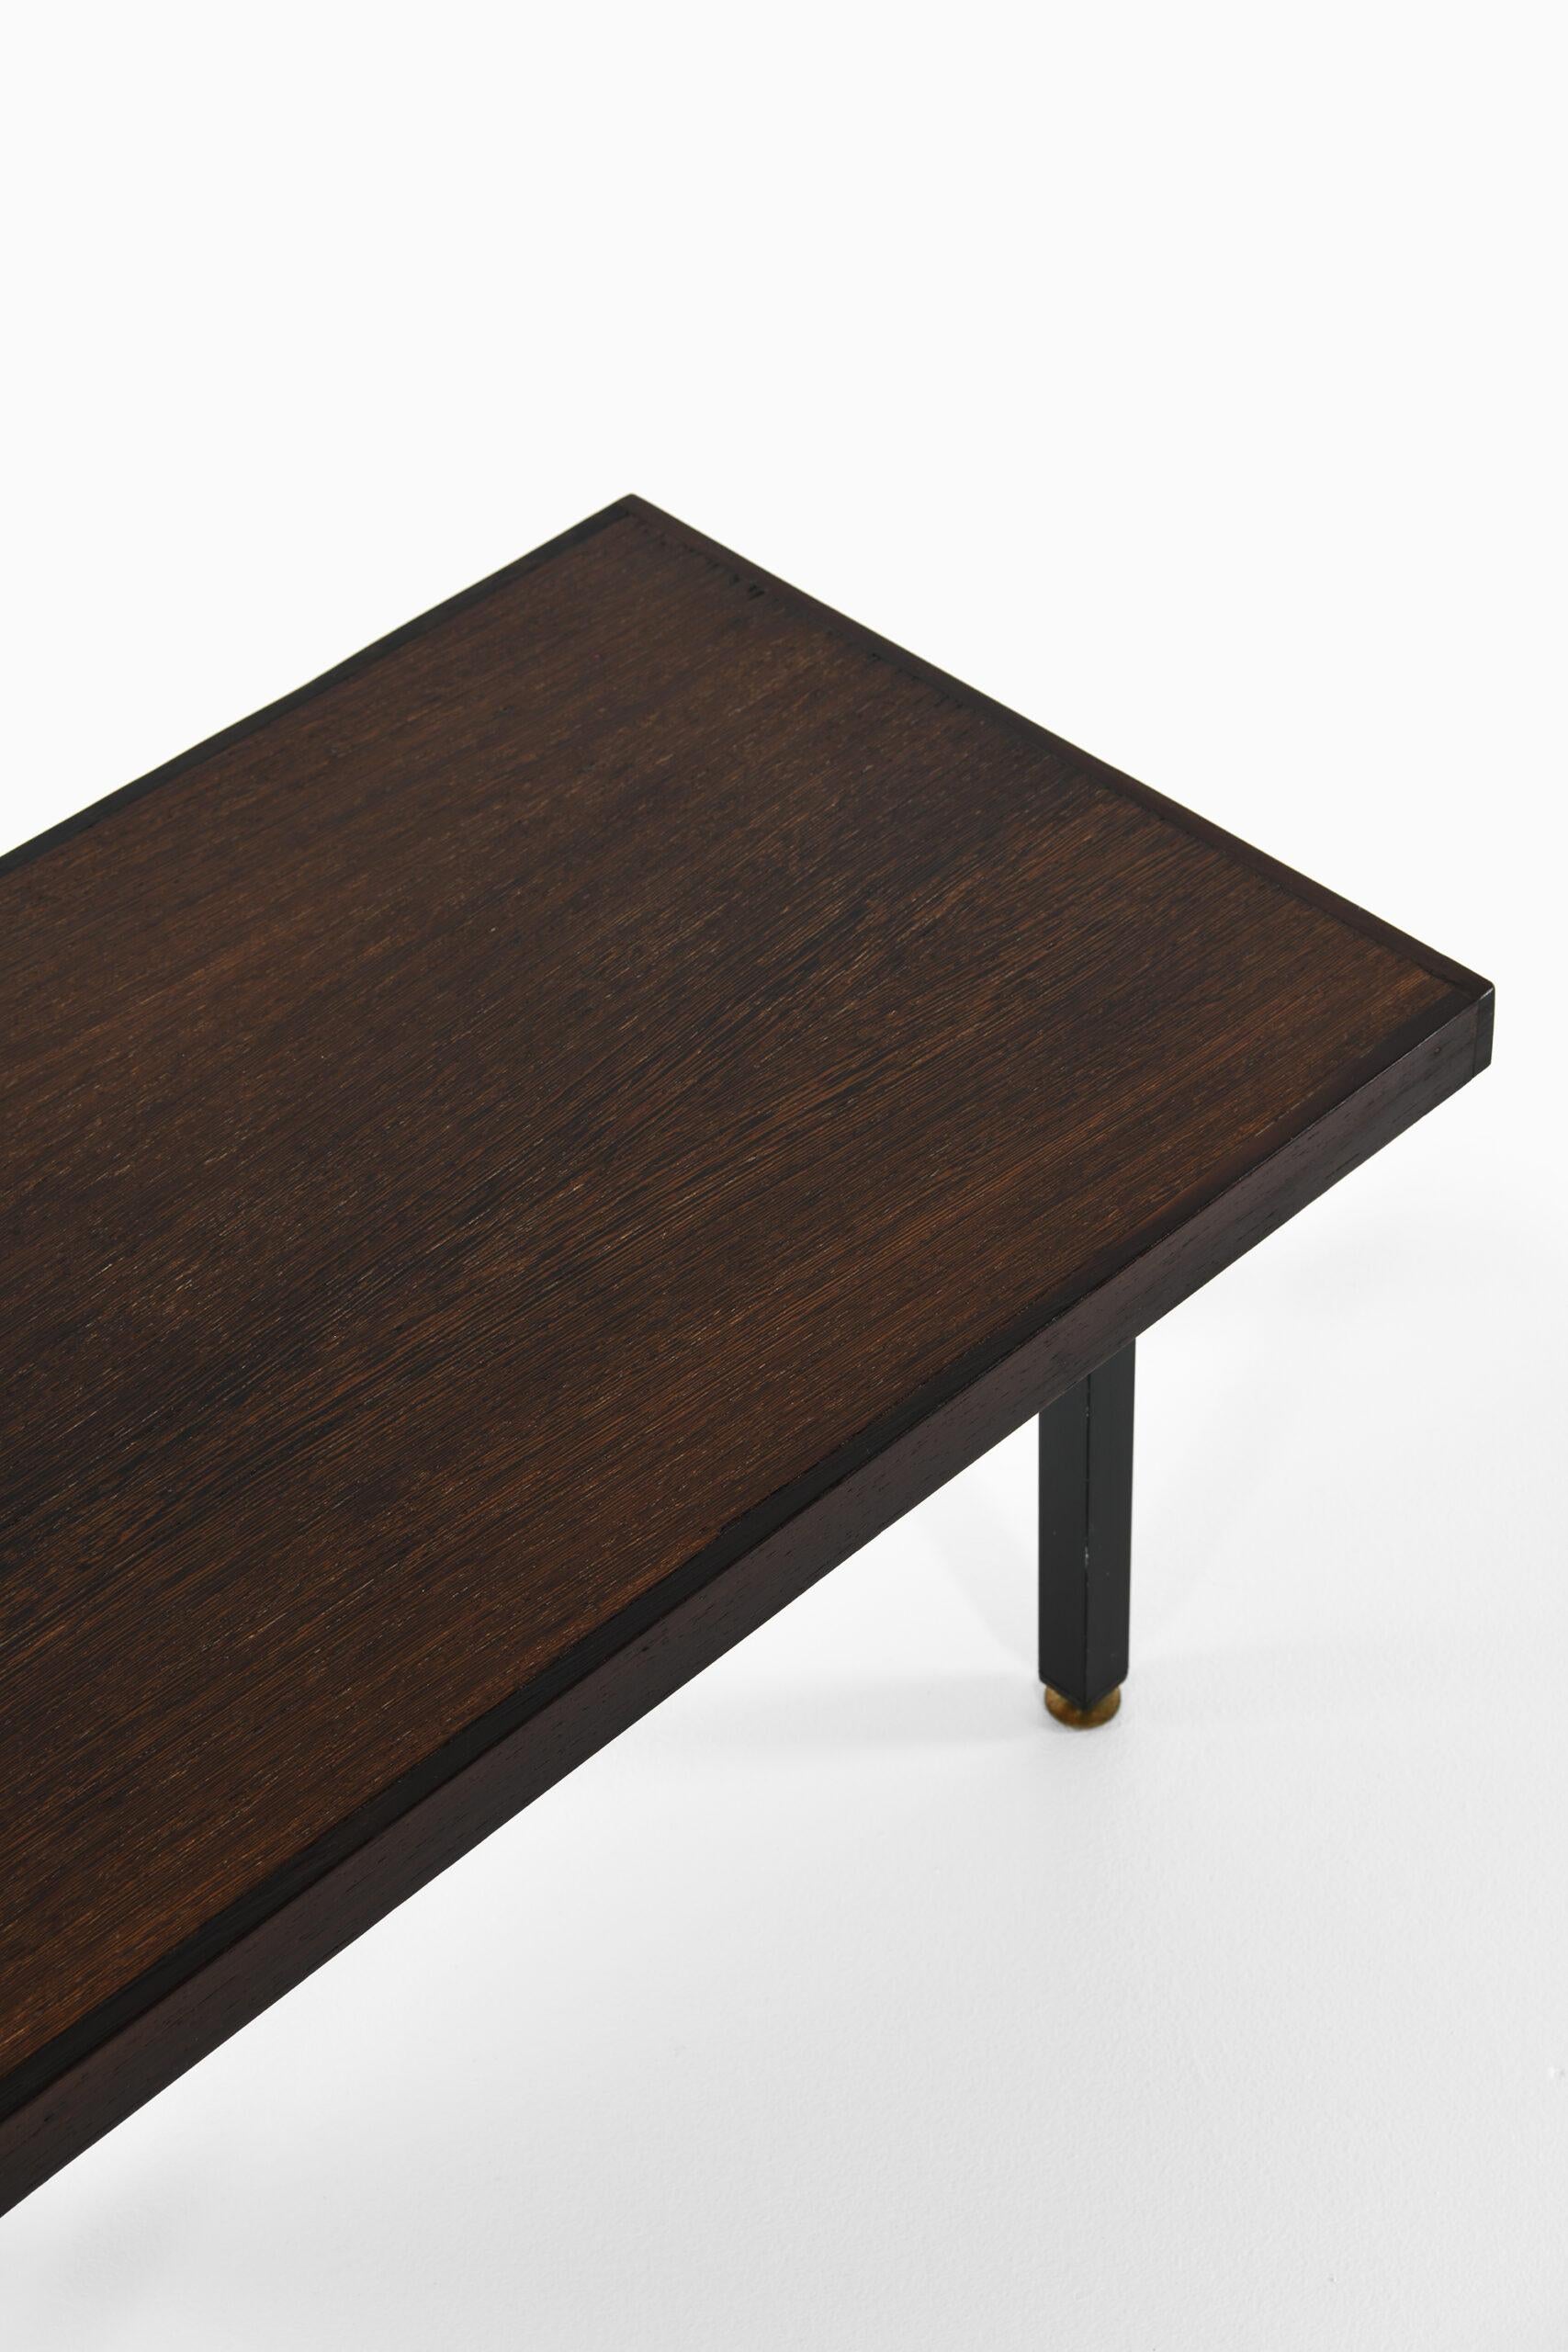 Scandinavian Modern Side Tables / Benches Produced in Sweden For Sale